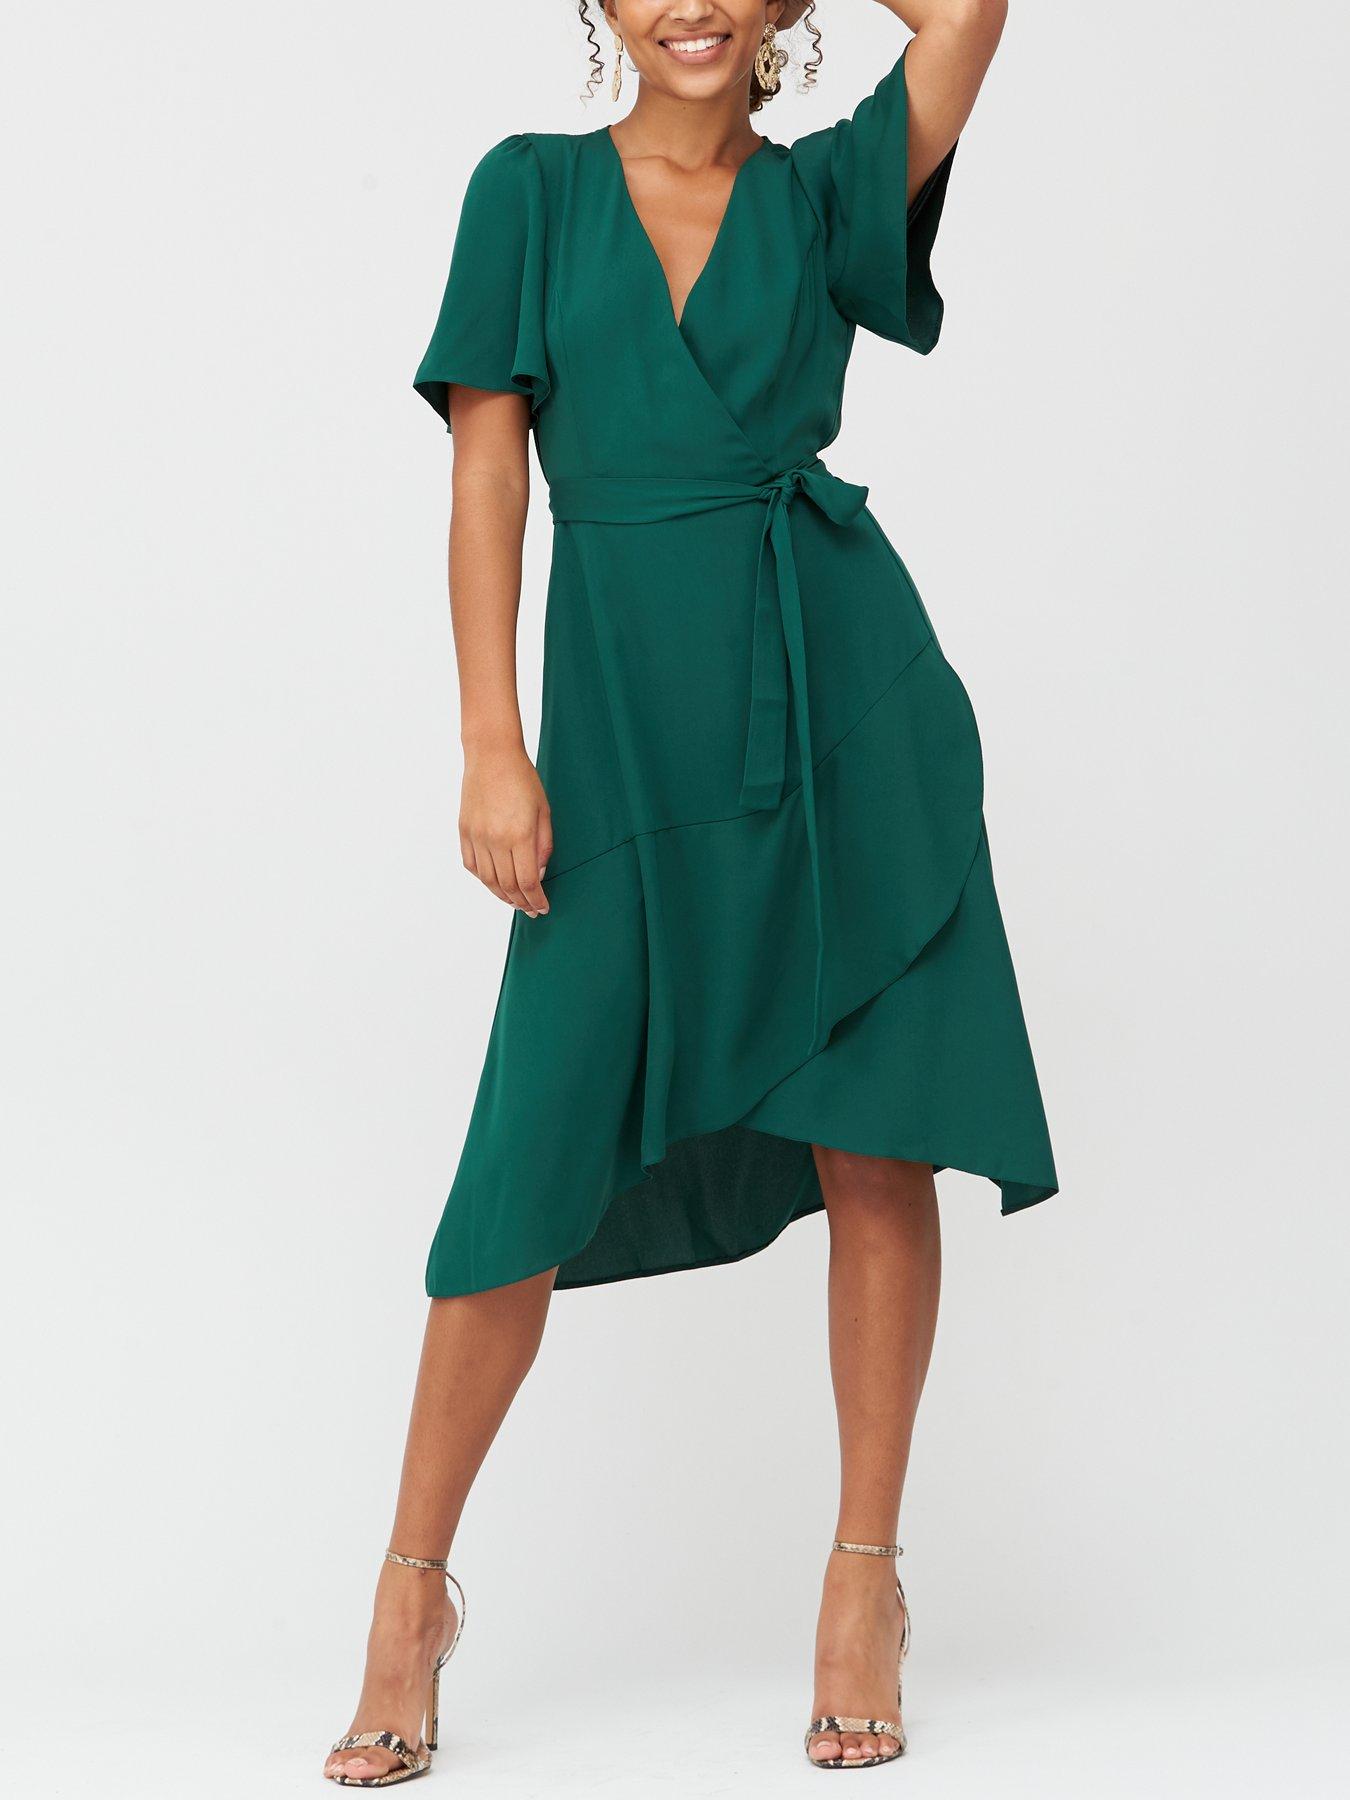 midi going out dress uk